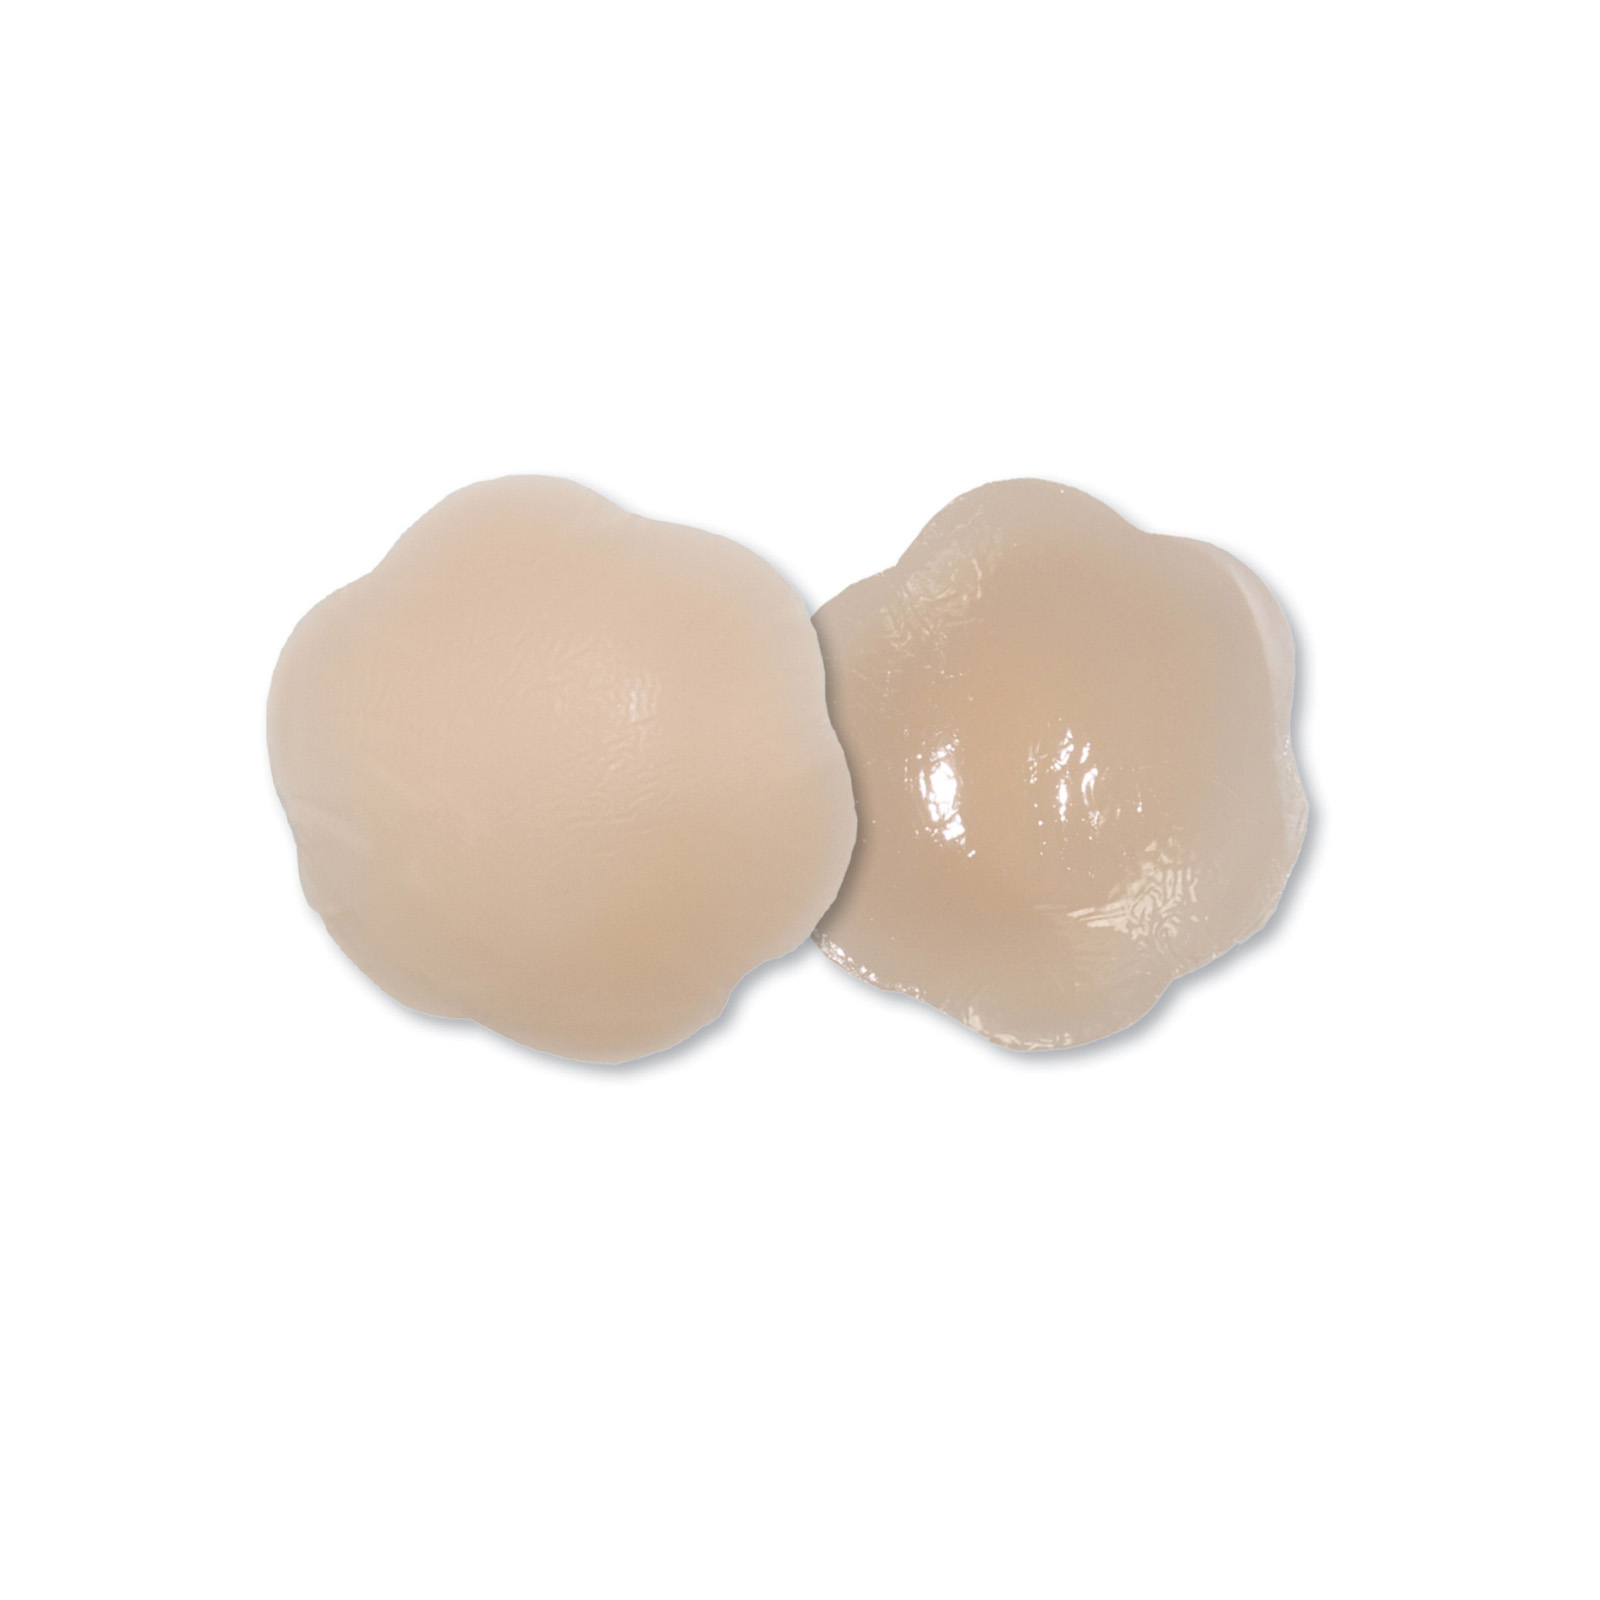 NIPPLESS COVER Comfort BH in beige